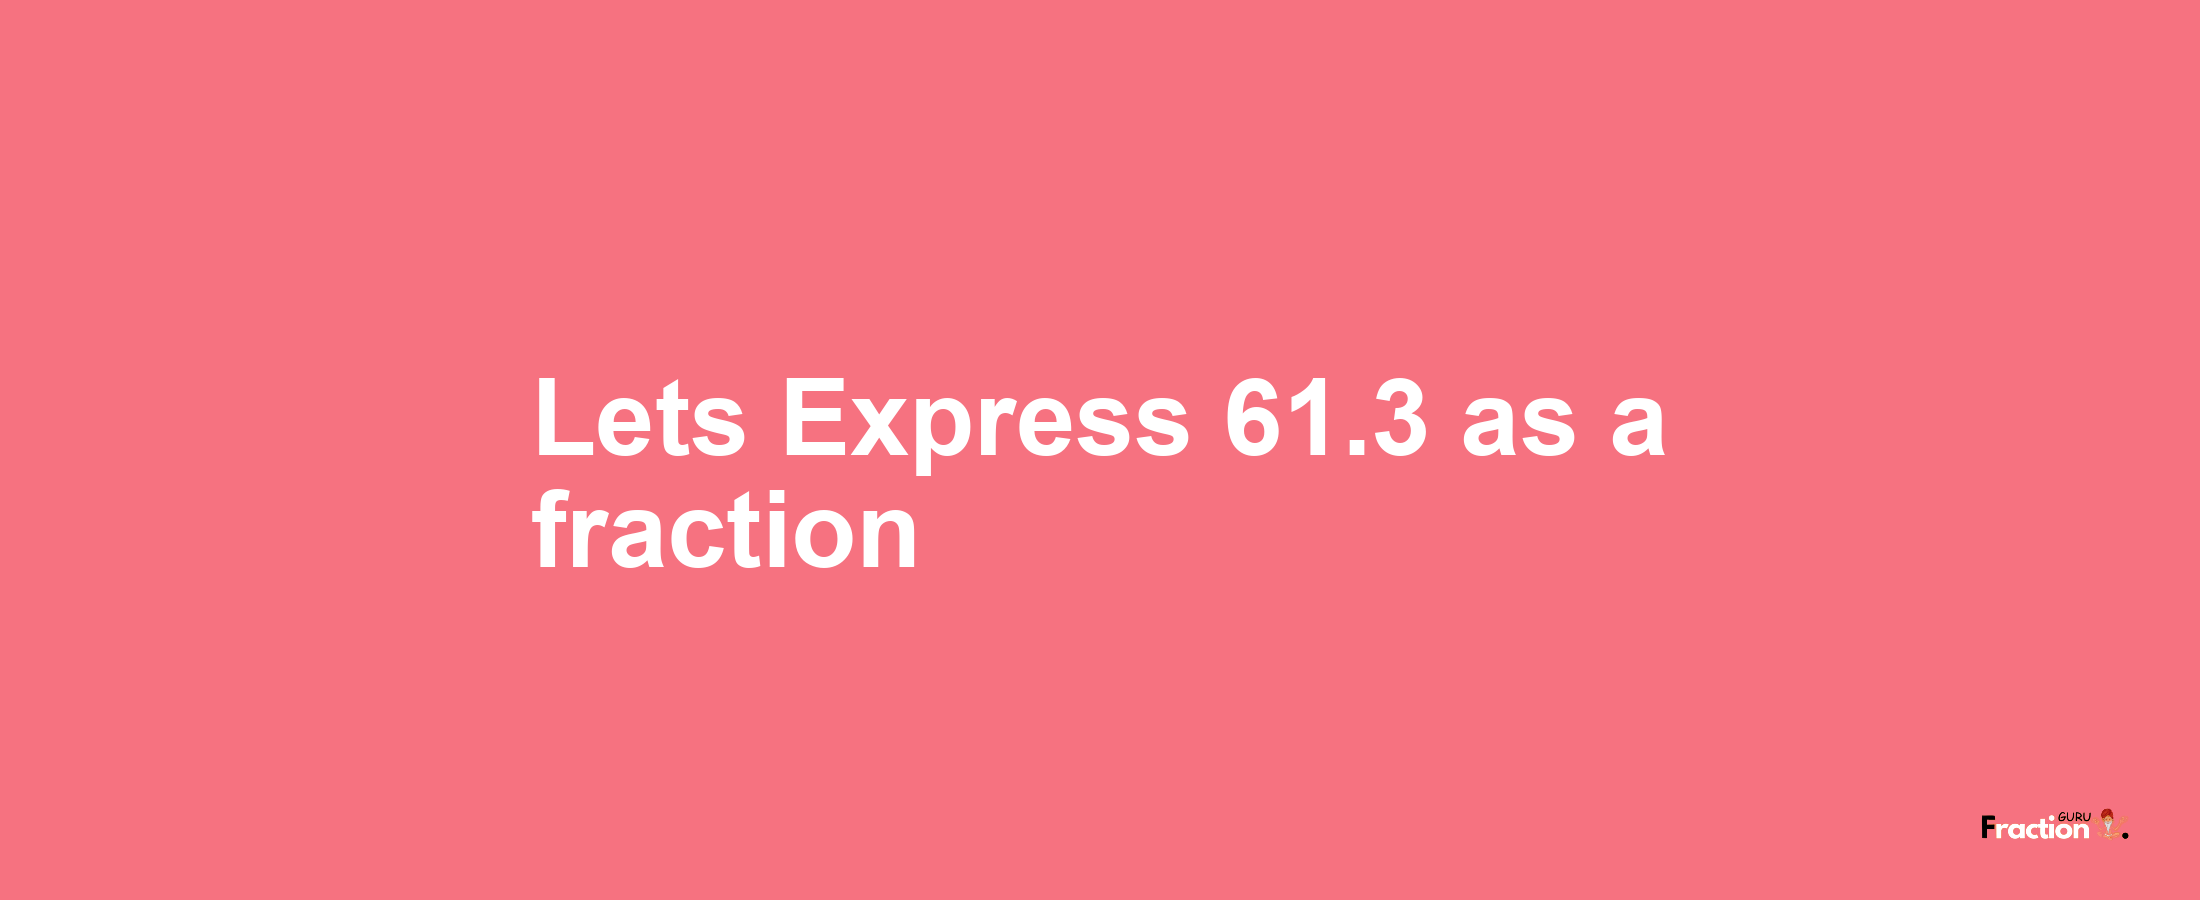 Lets Express 61.3 as afraction